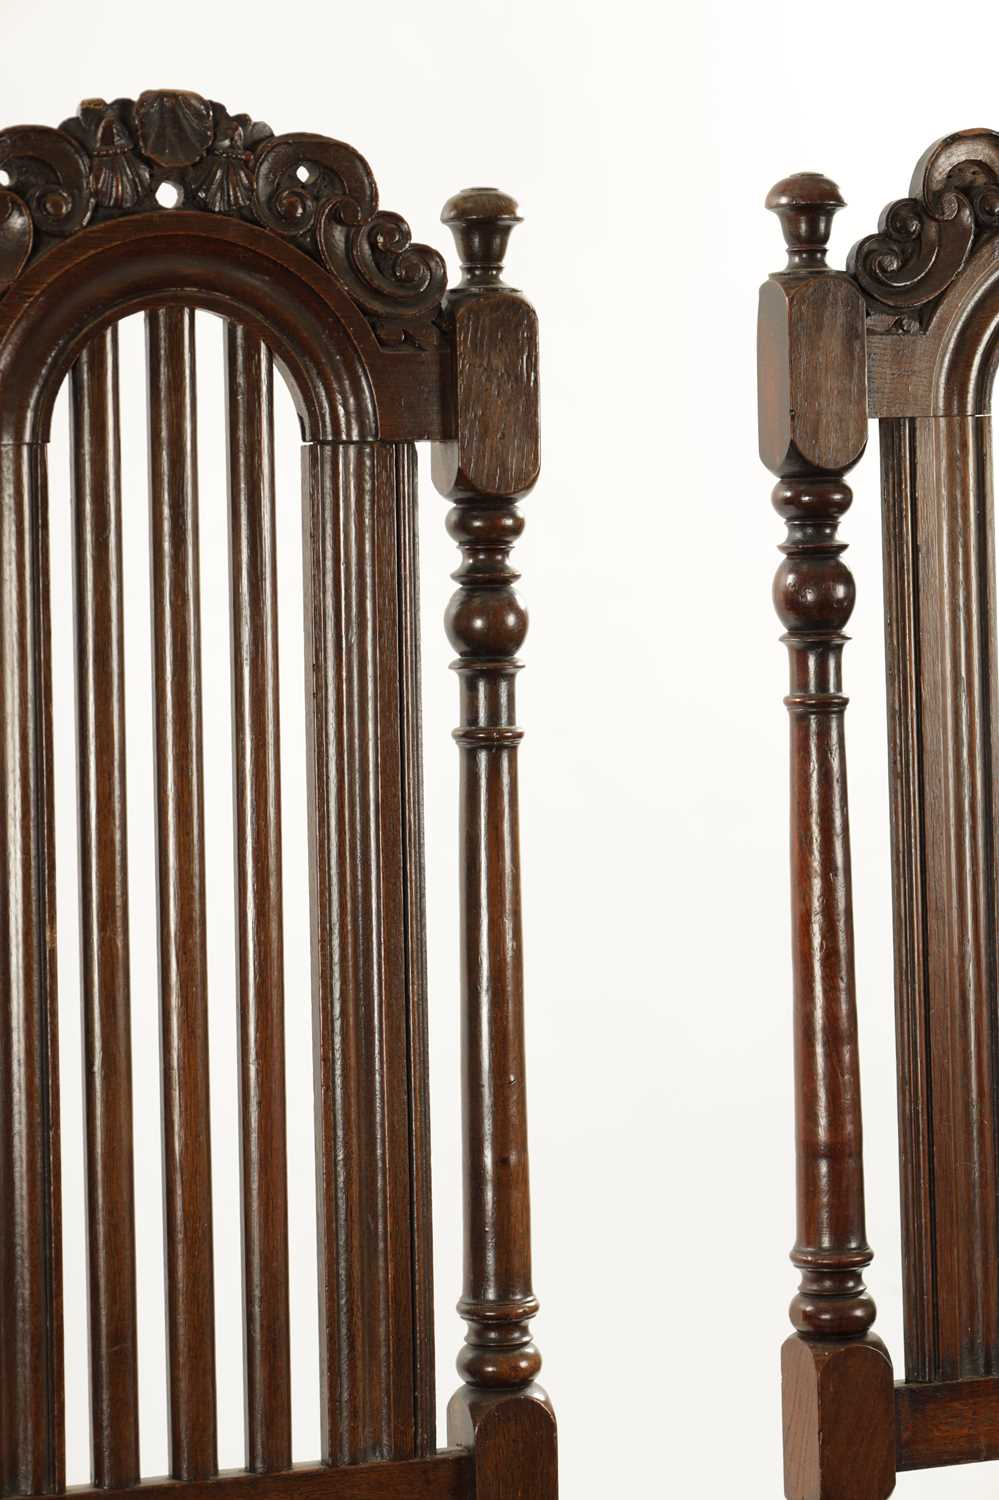 A RARE SET OF TEN EARLY 18TH CENTURY WILLIAM AND MARY STYLE OAK CHAIRS - Image 3 of 12